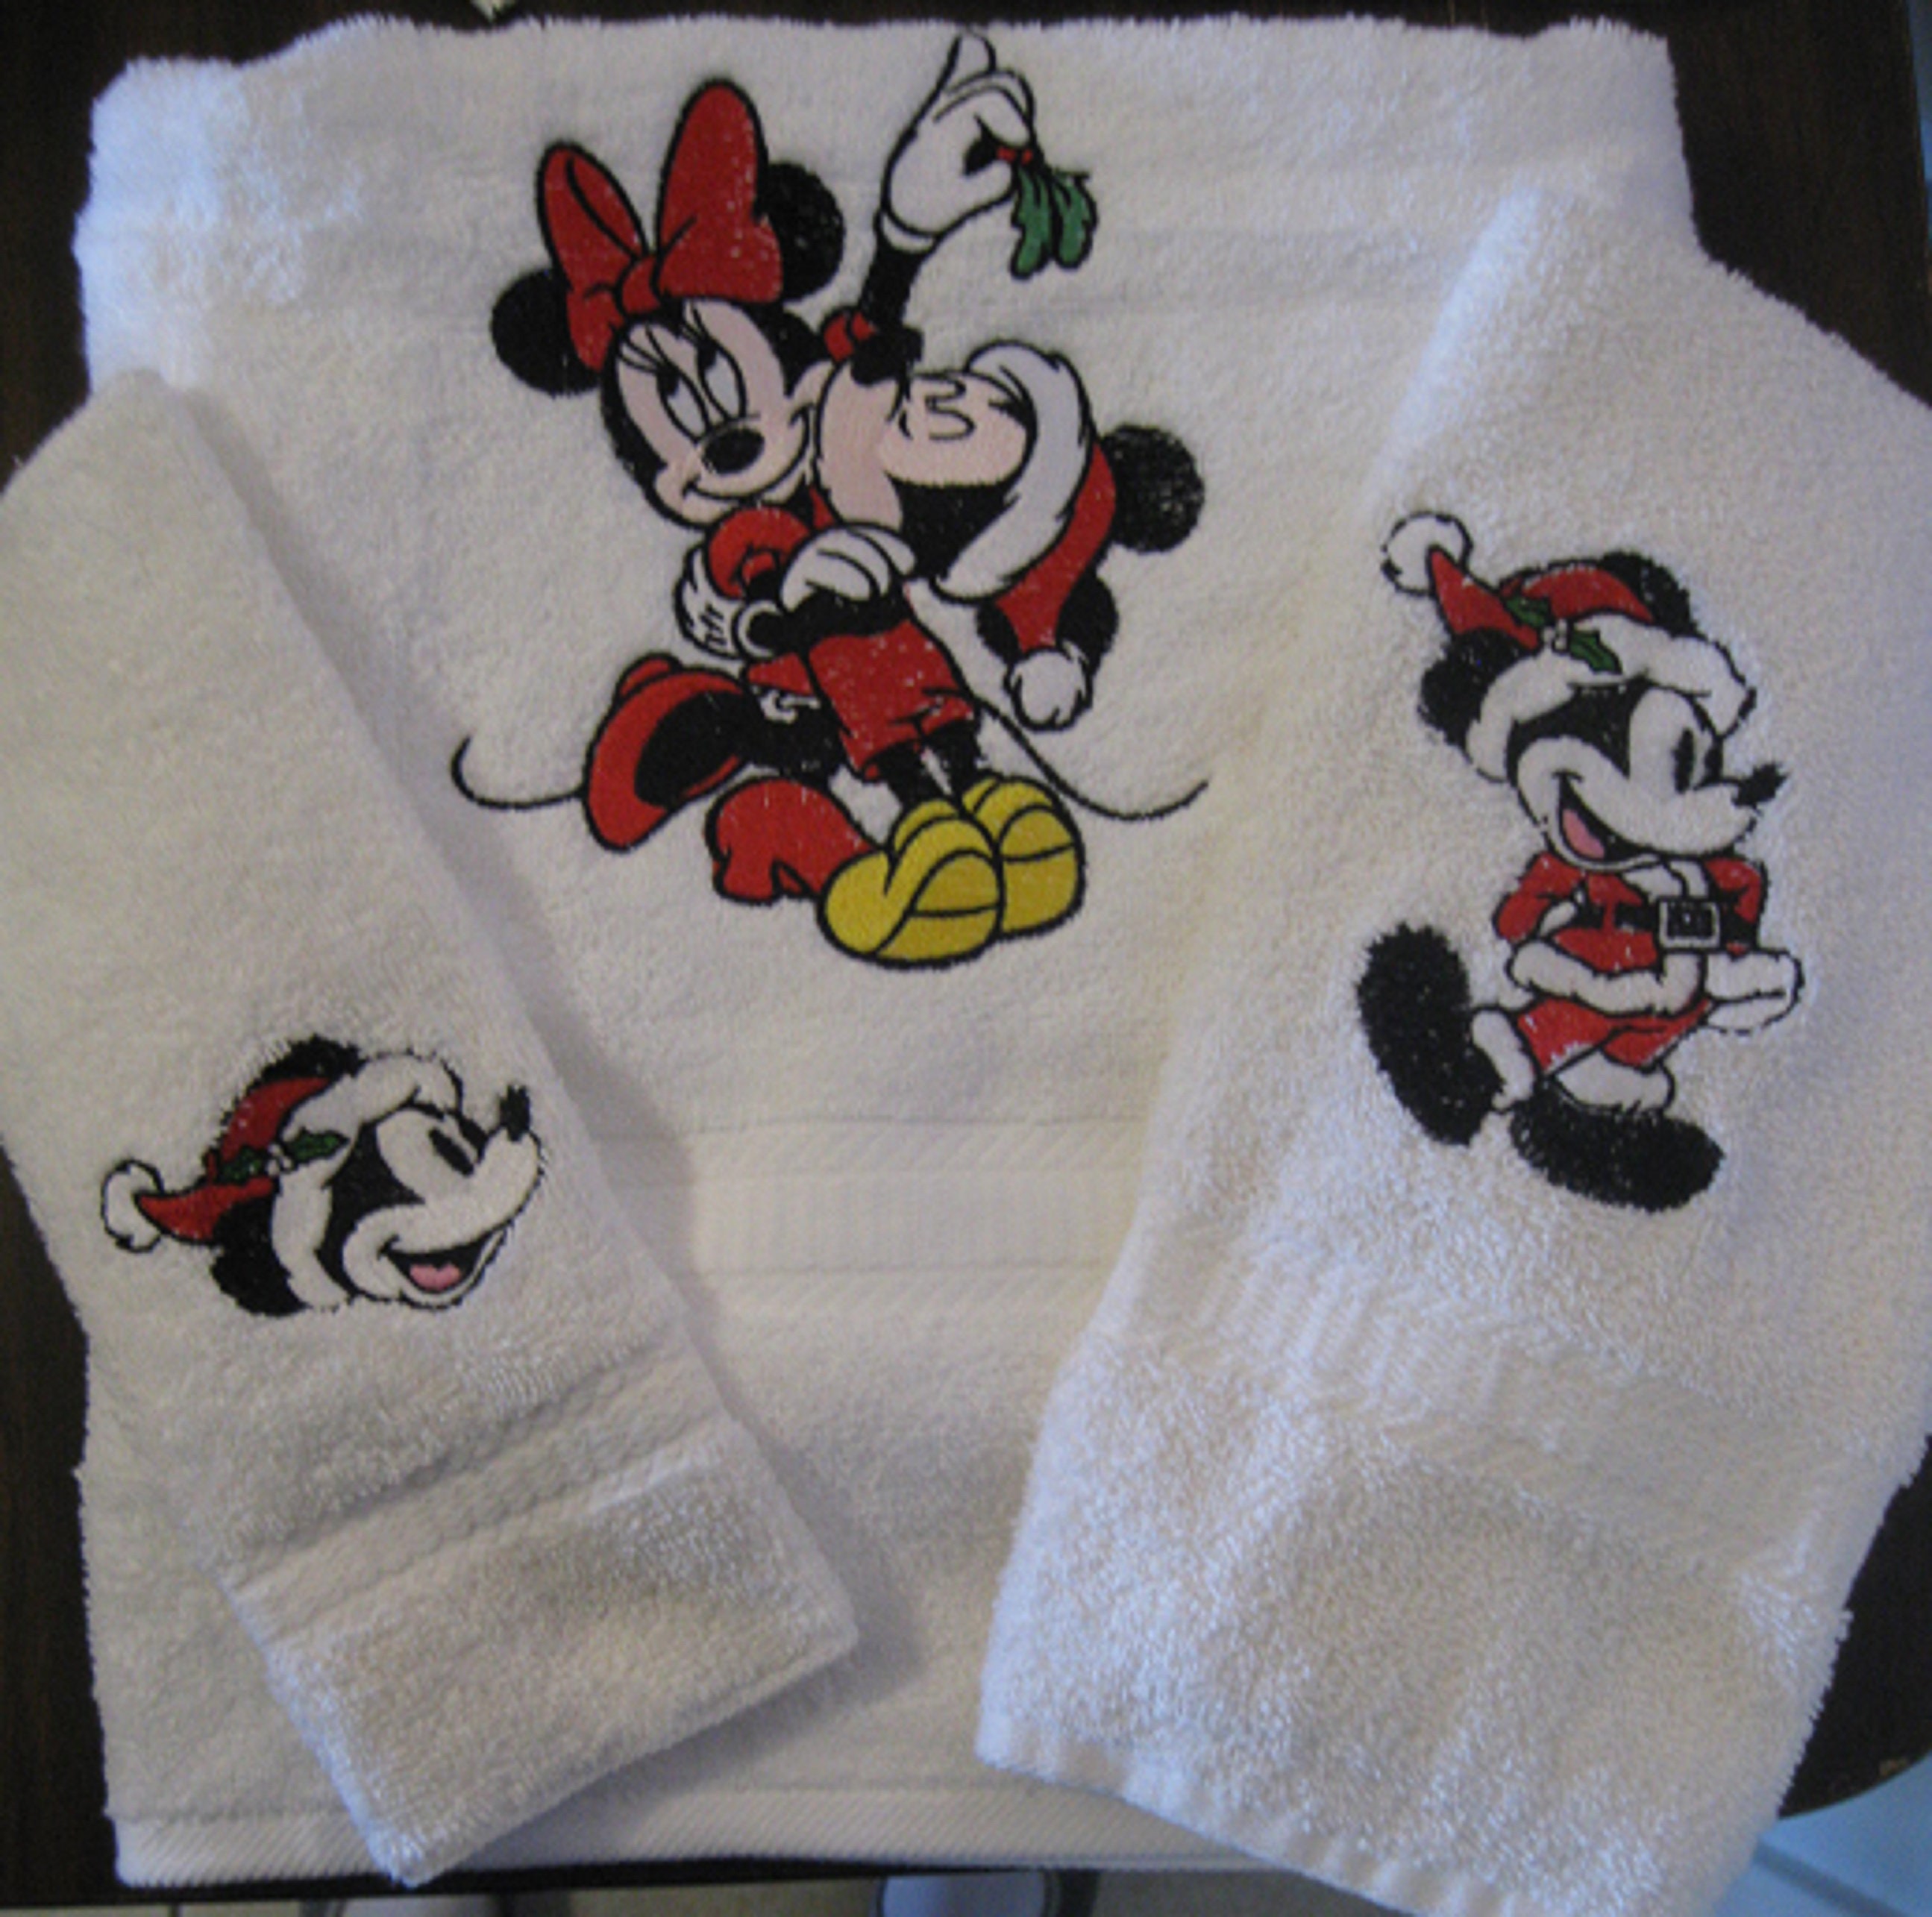 Disney's Mickey and Minnie Winter Wishes Kitchen Towel 2-pk. by St.  Nicholas Square®